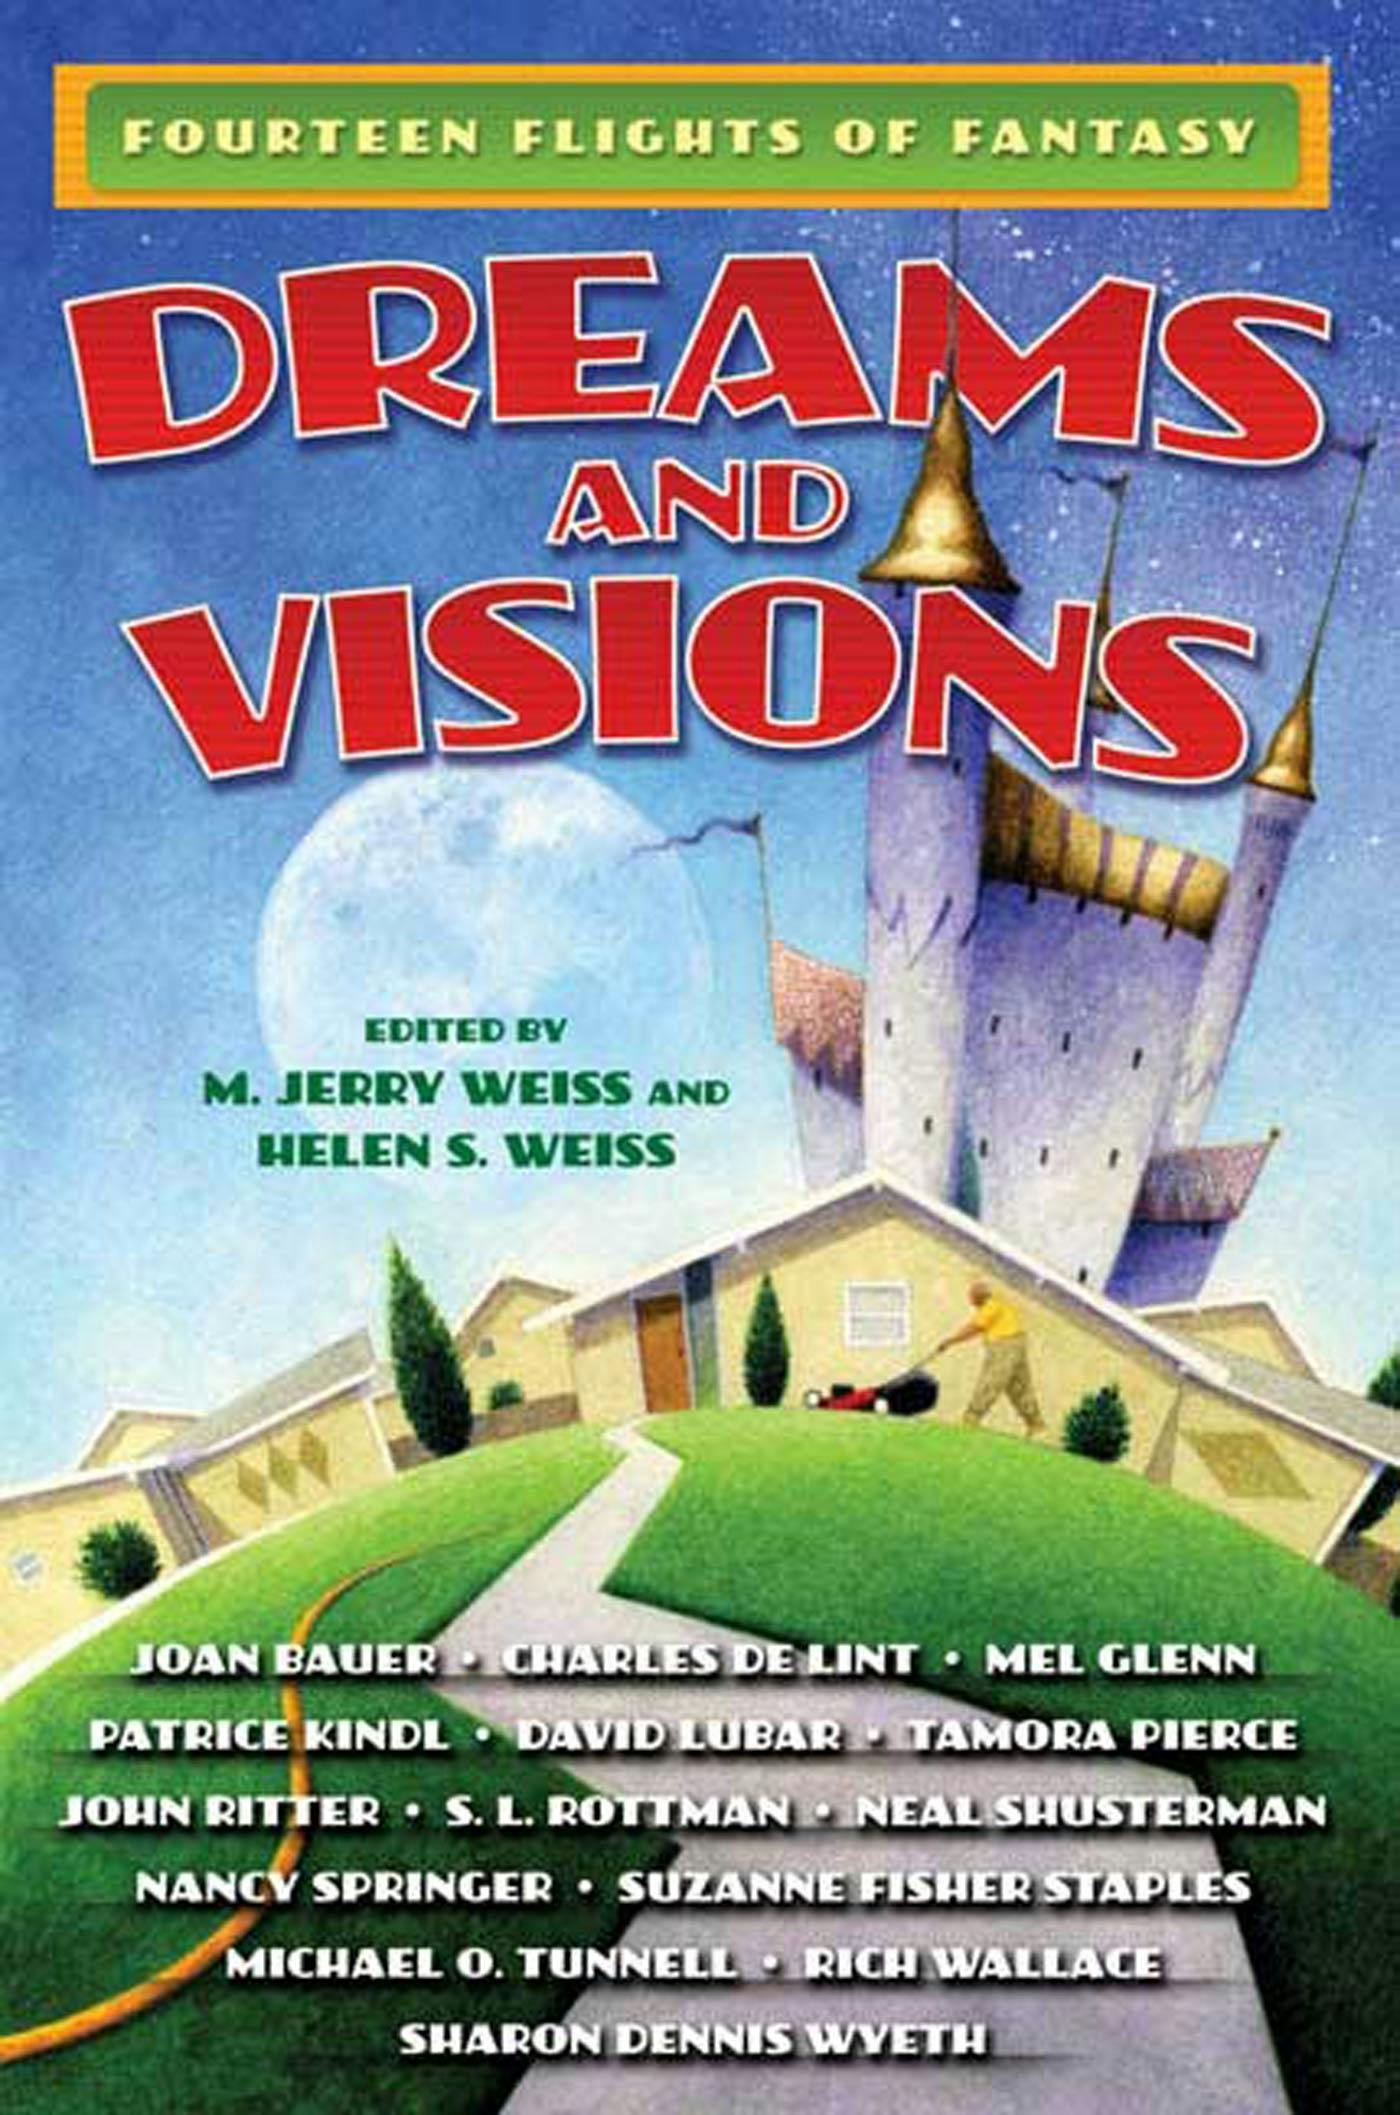 Cover for the book titled as: Dreams and Visions